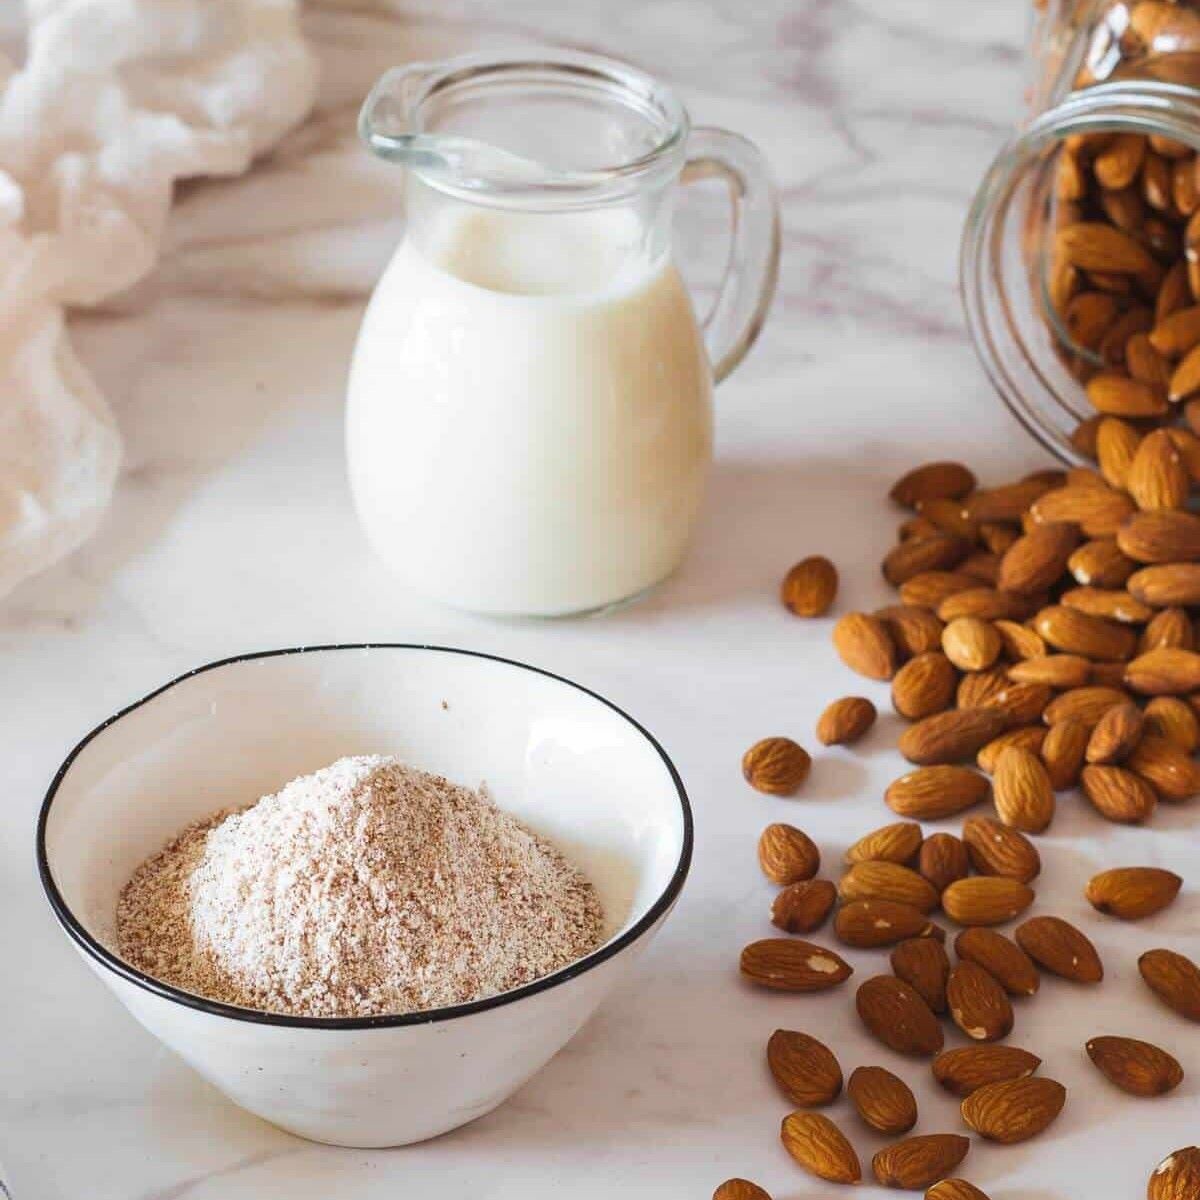 How To Store Almond Pulp